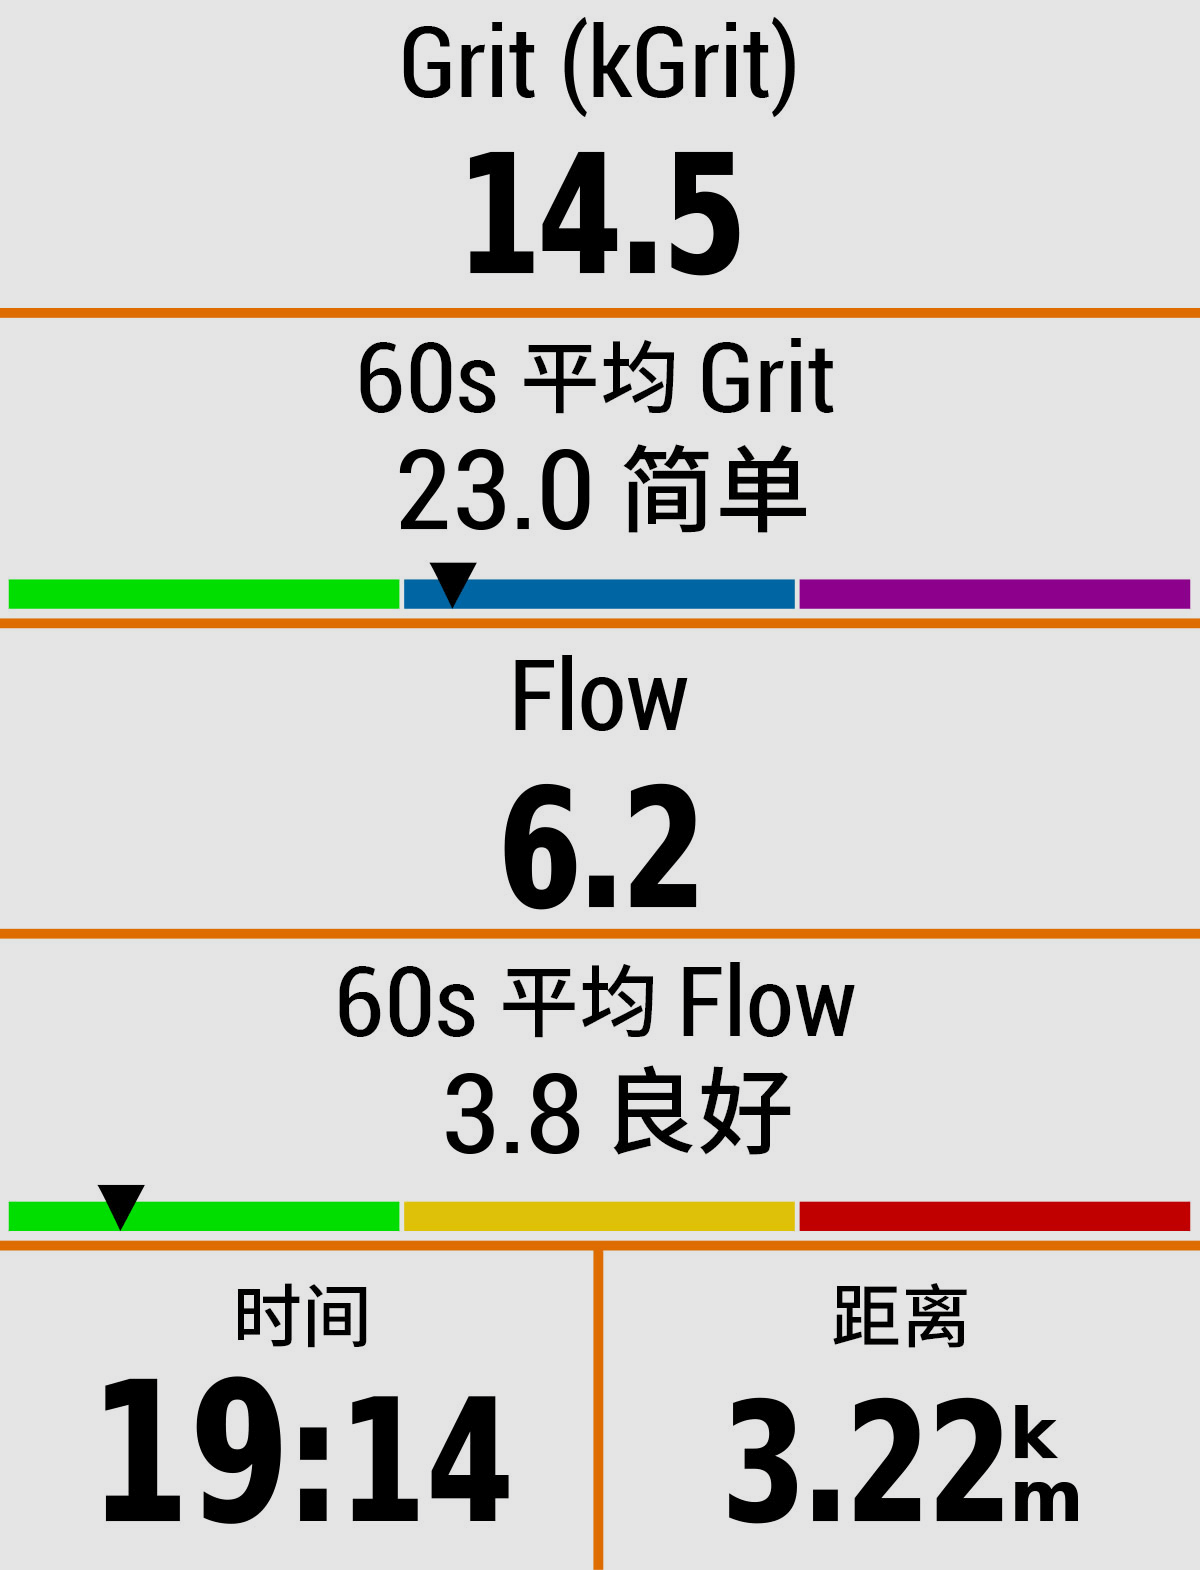 A screen displaying Flow